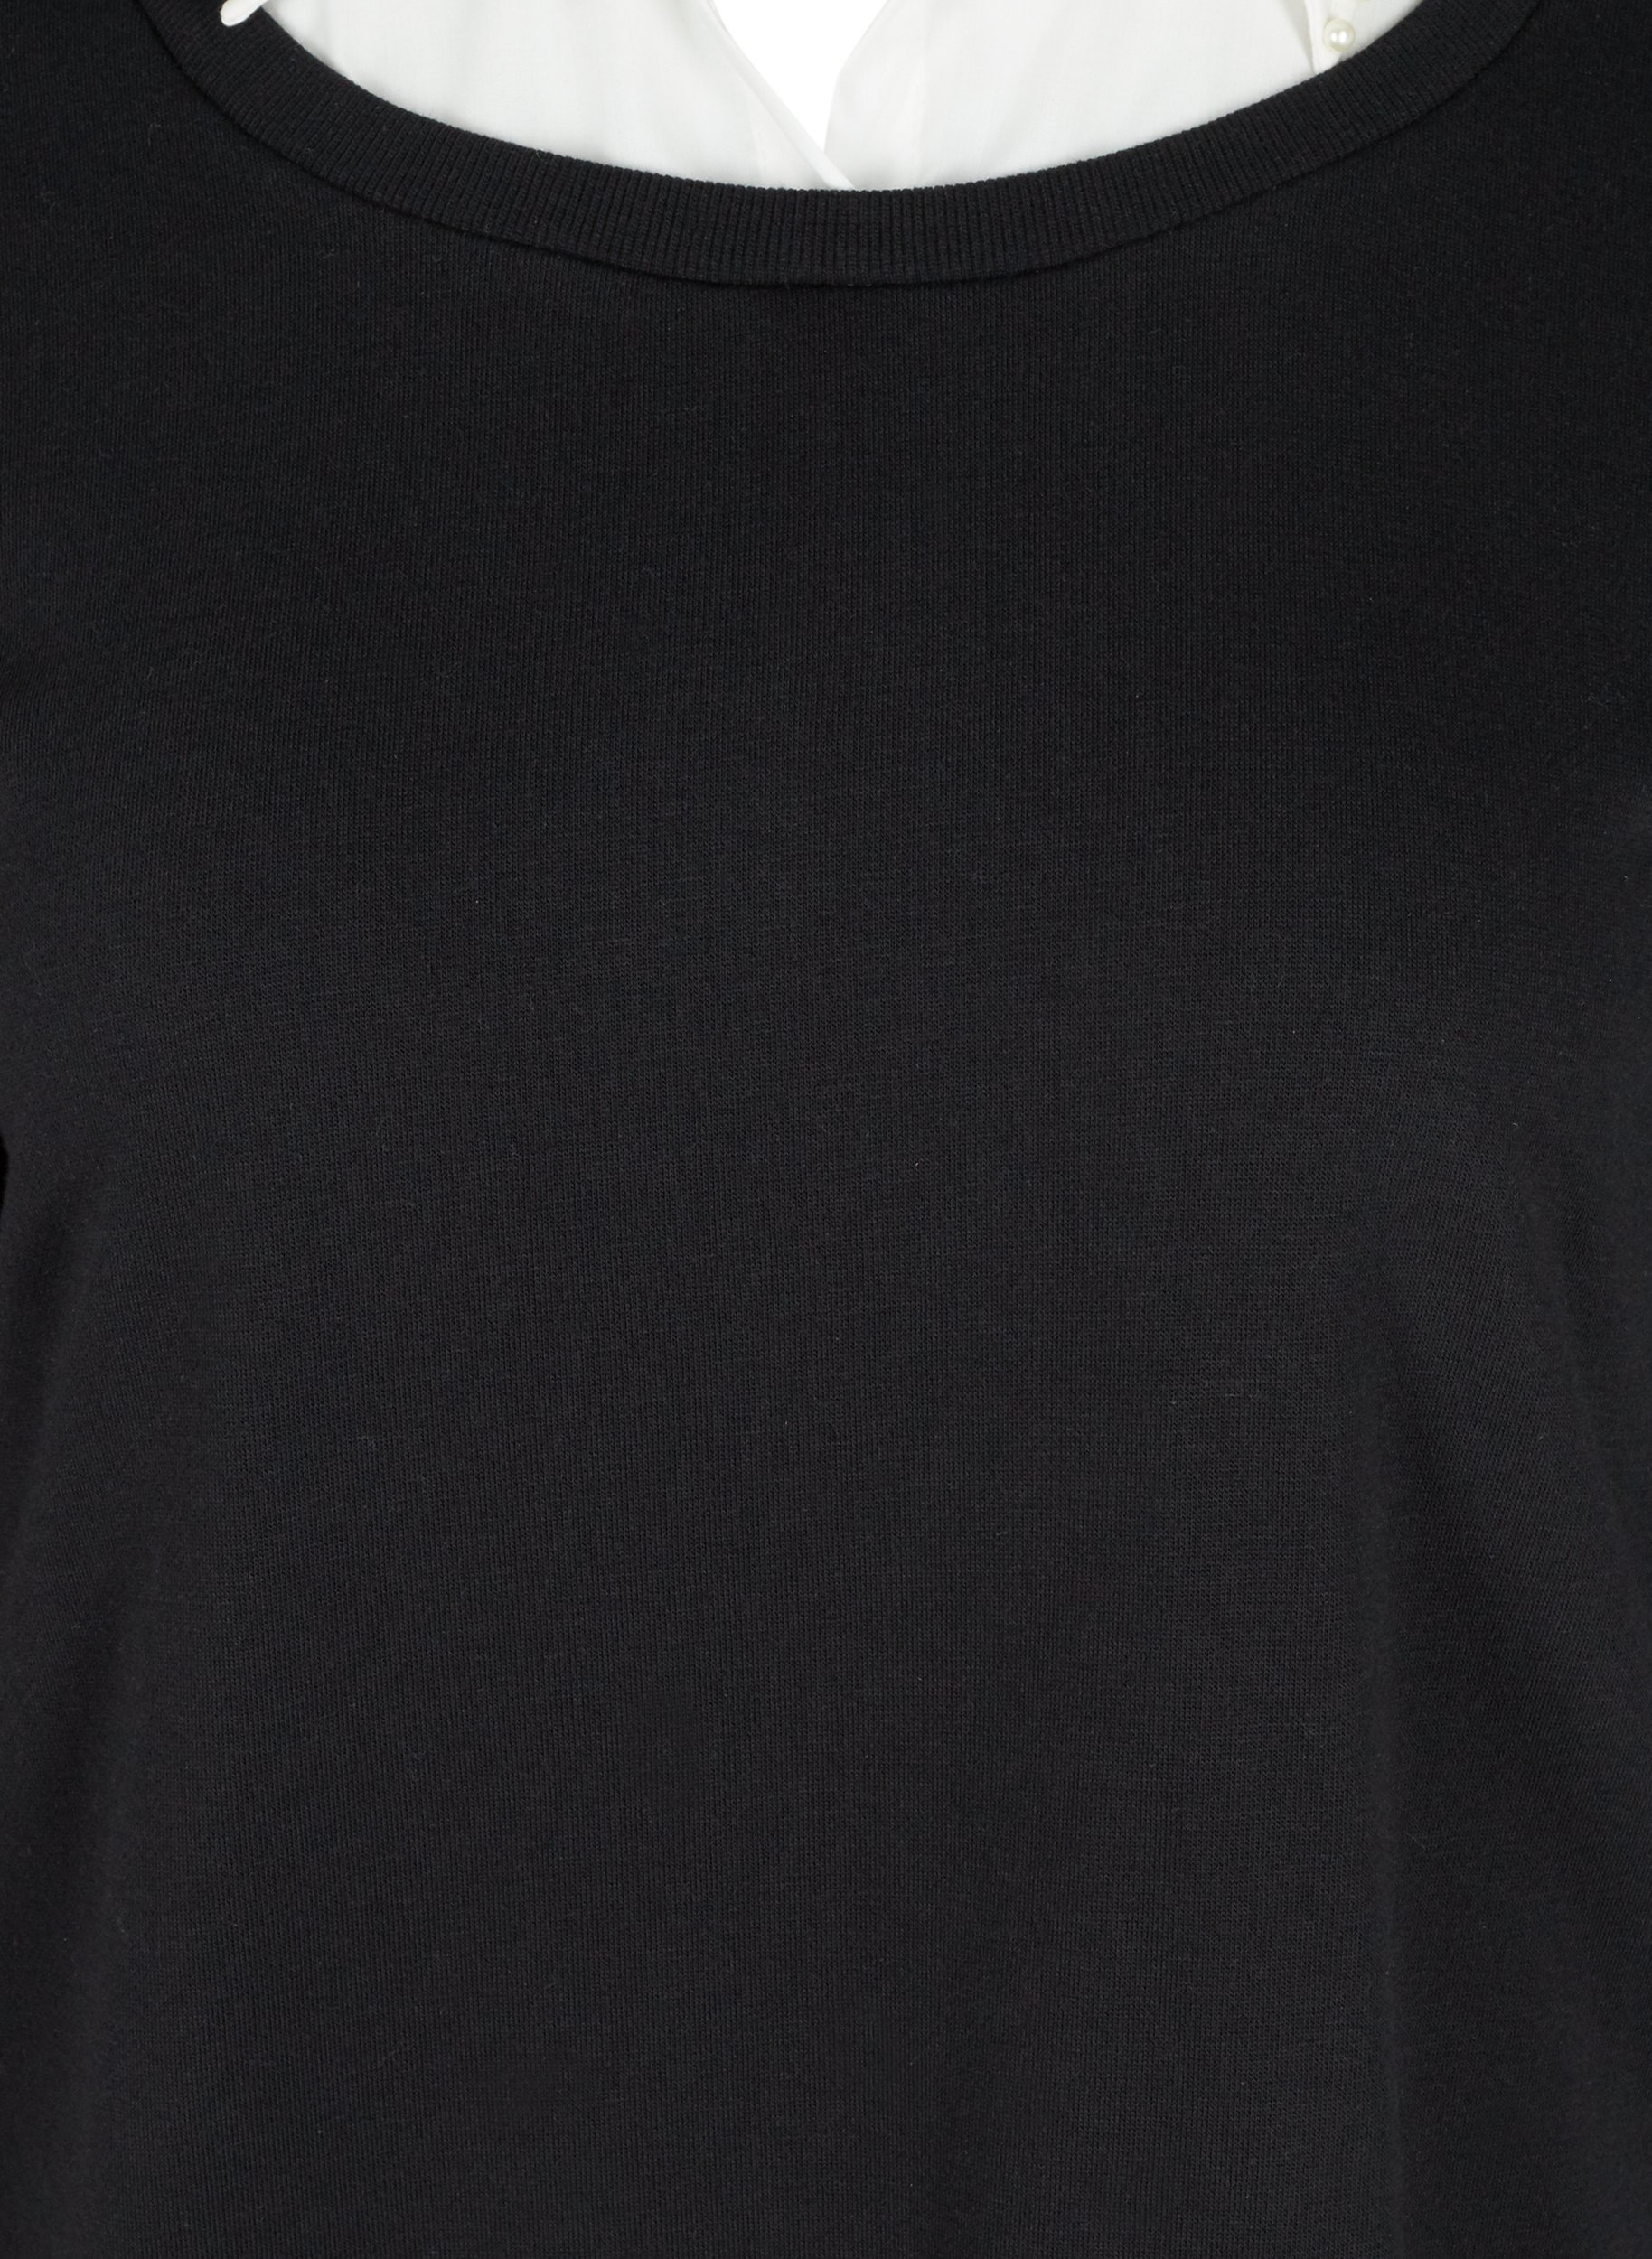 Sweater with attached shirt - Black ...